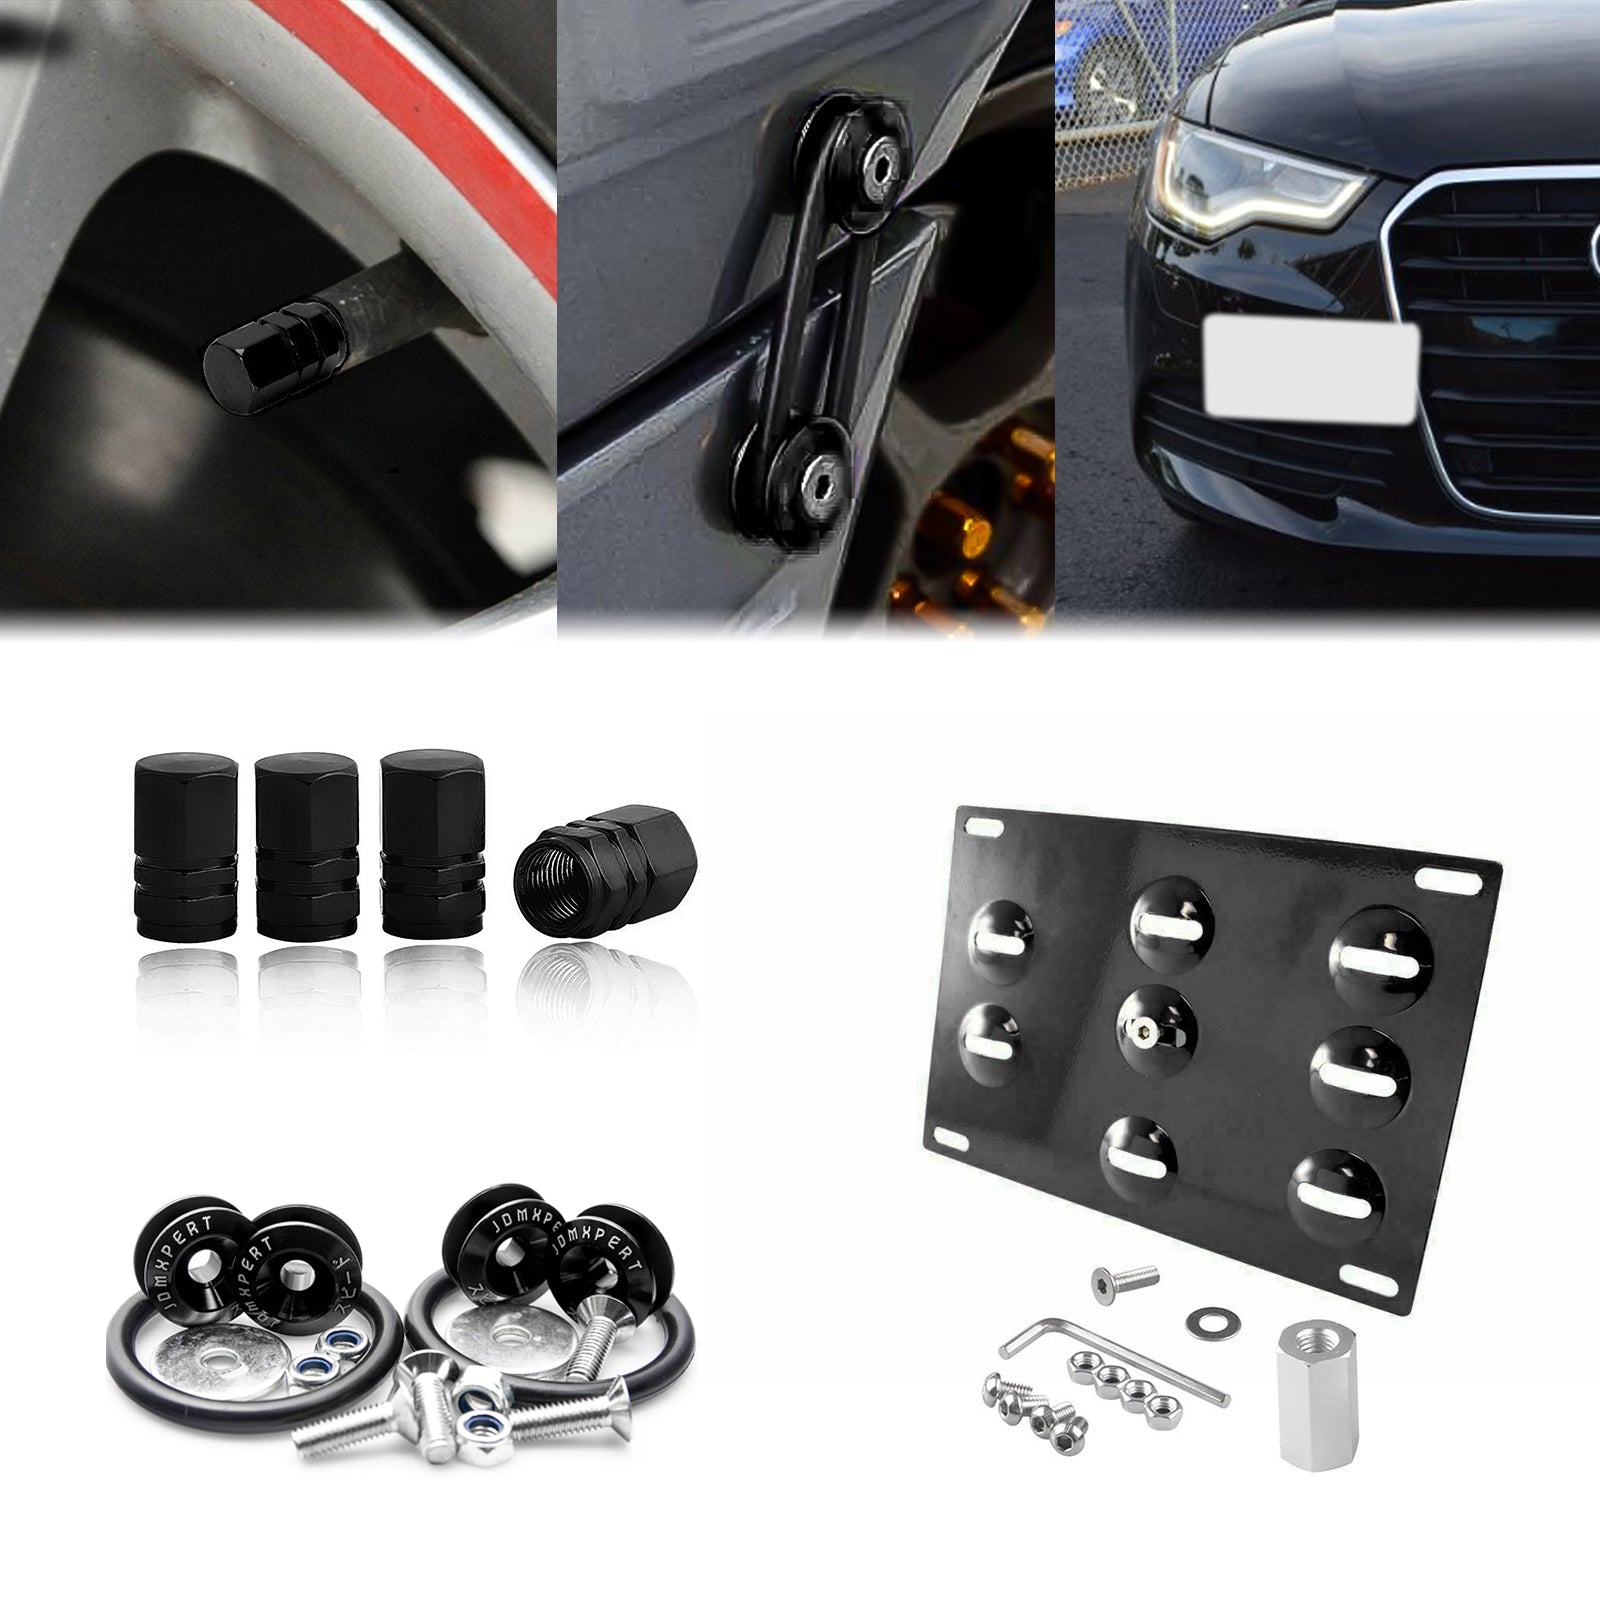 Set Tow Hook License Plate + Air Valve + Release Fastener For Audi A4